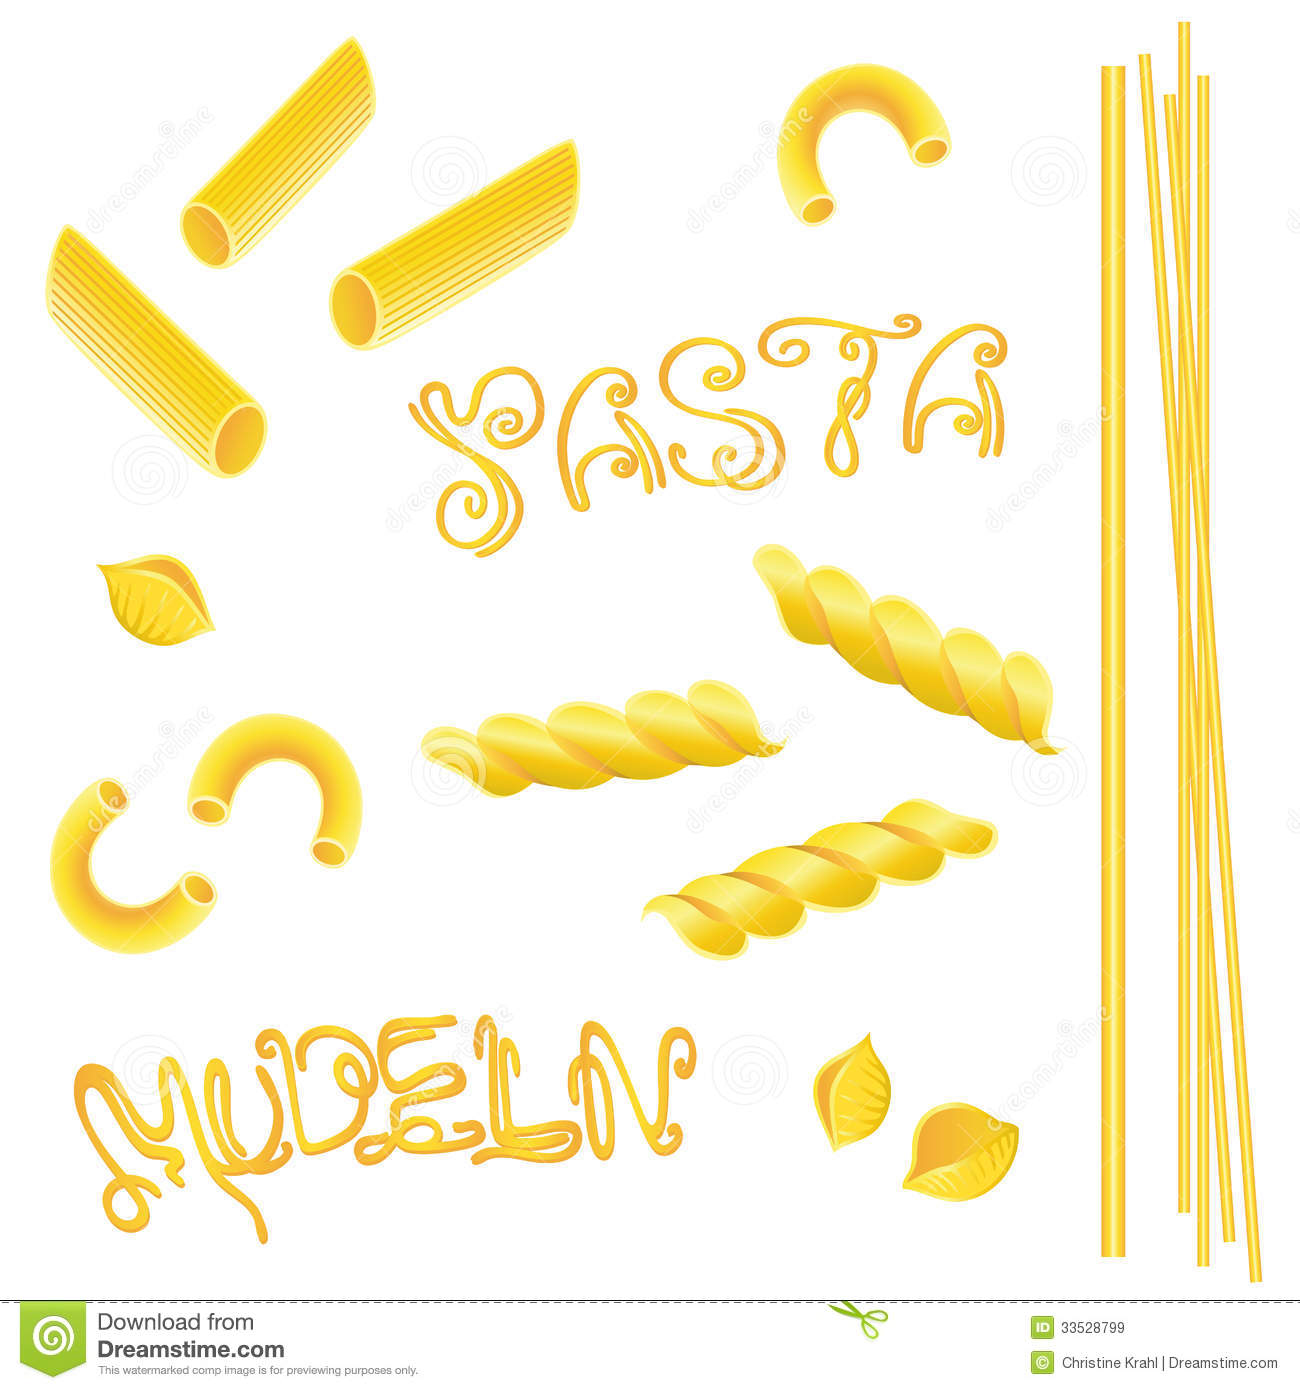 Noodles Pasta Royalty Free Stock Images   Image  33528799